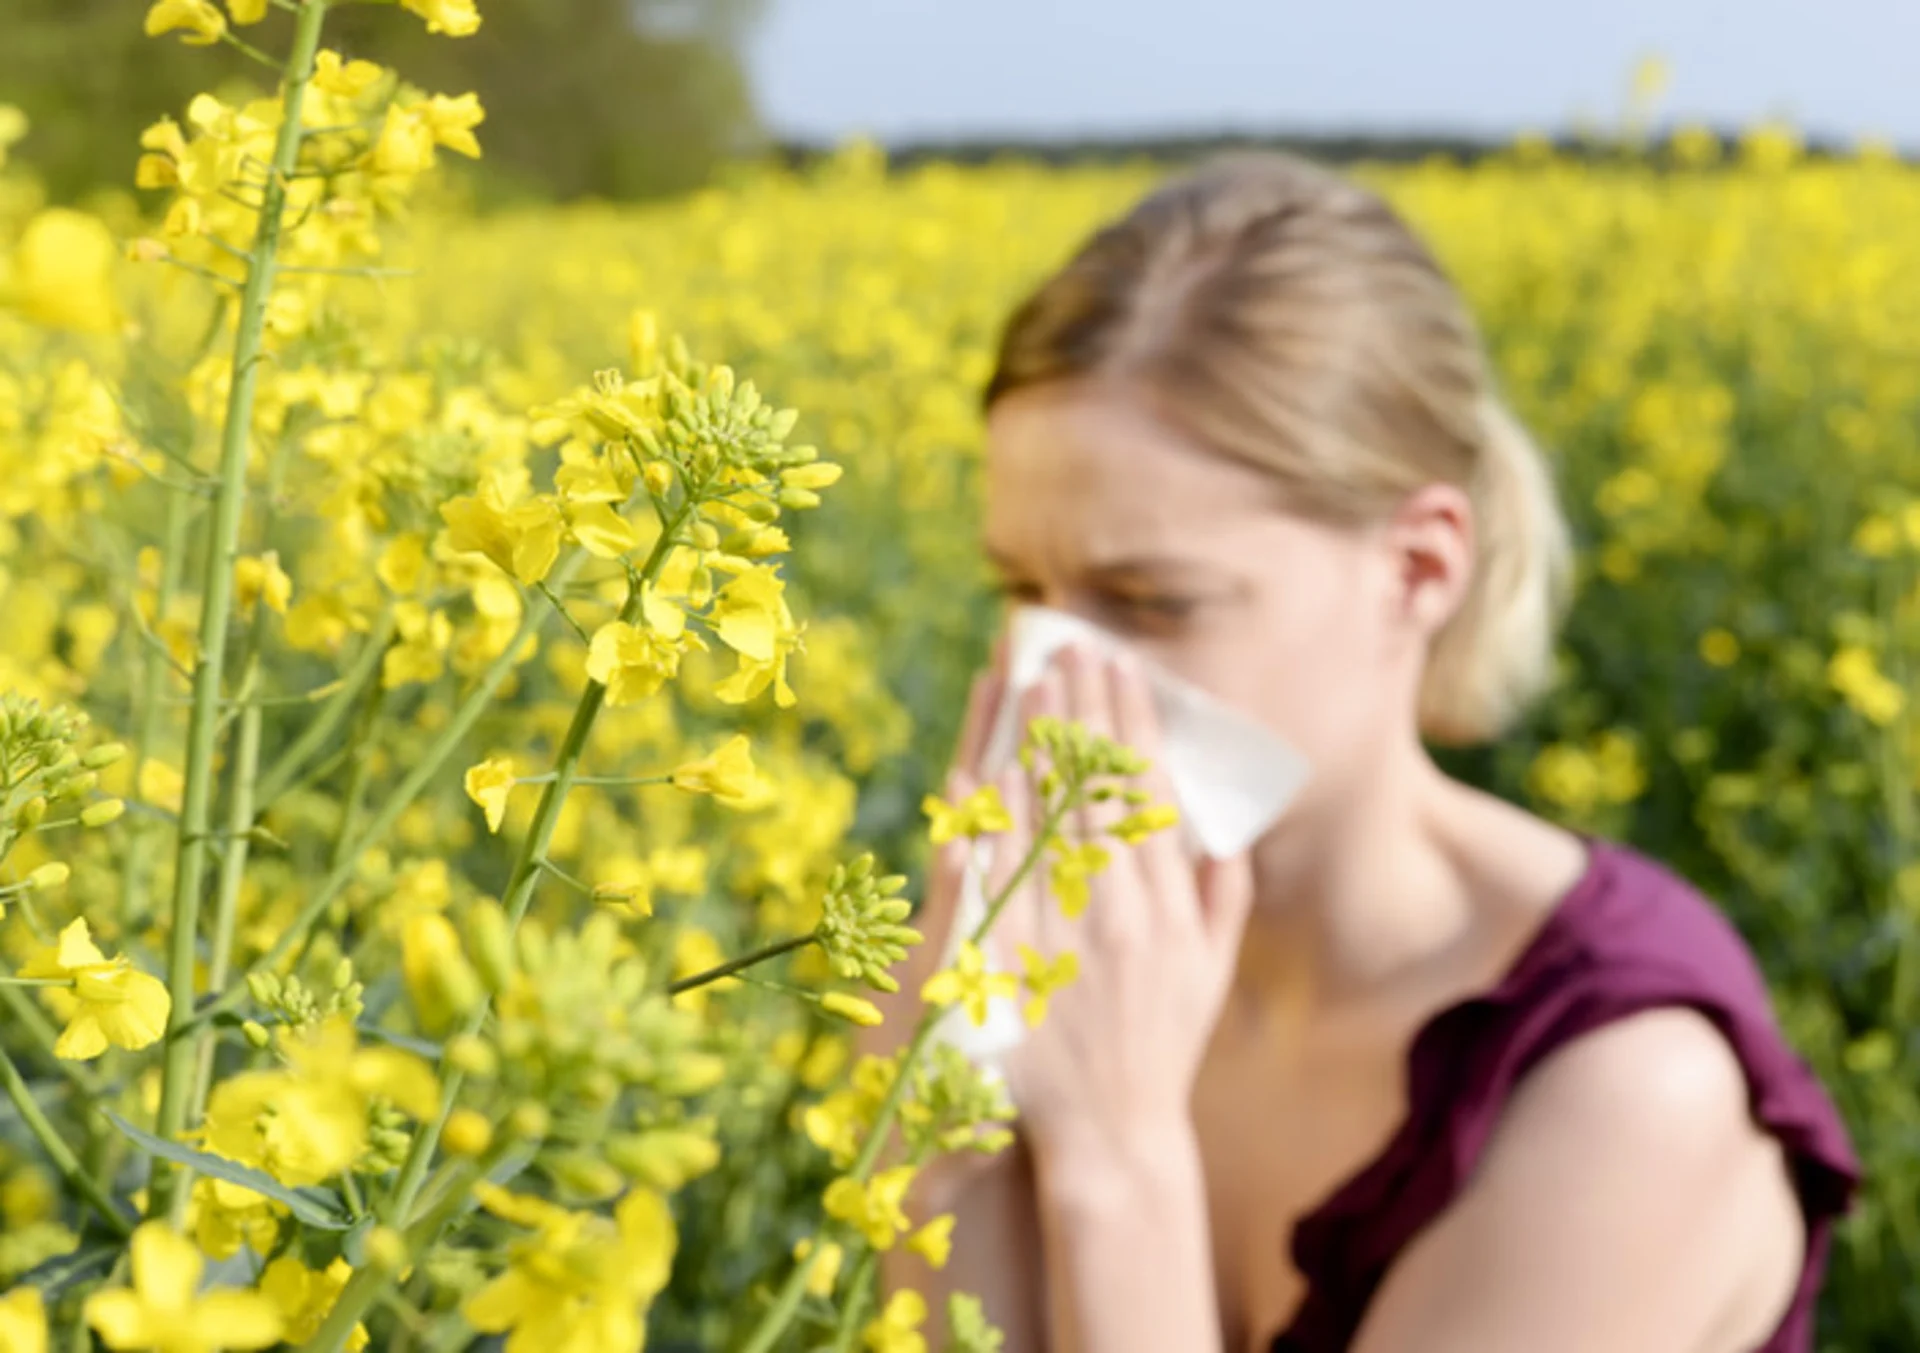 Brace yourself, this year's allergy season could get even worse